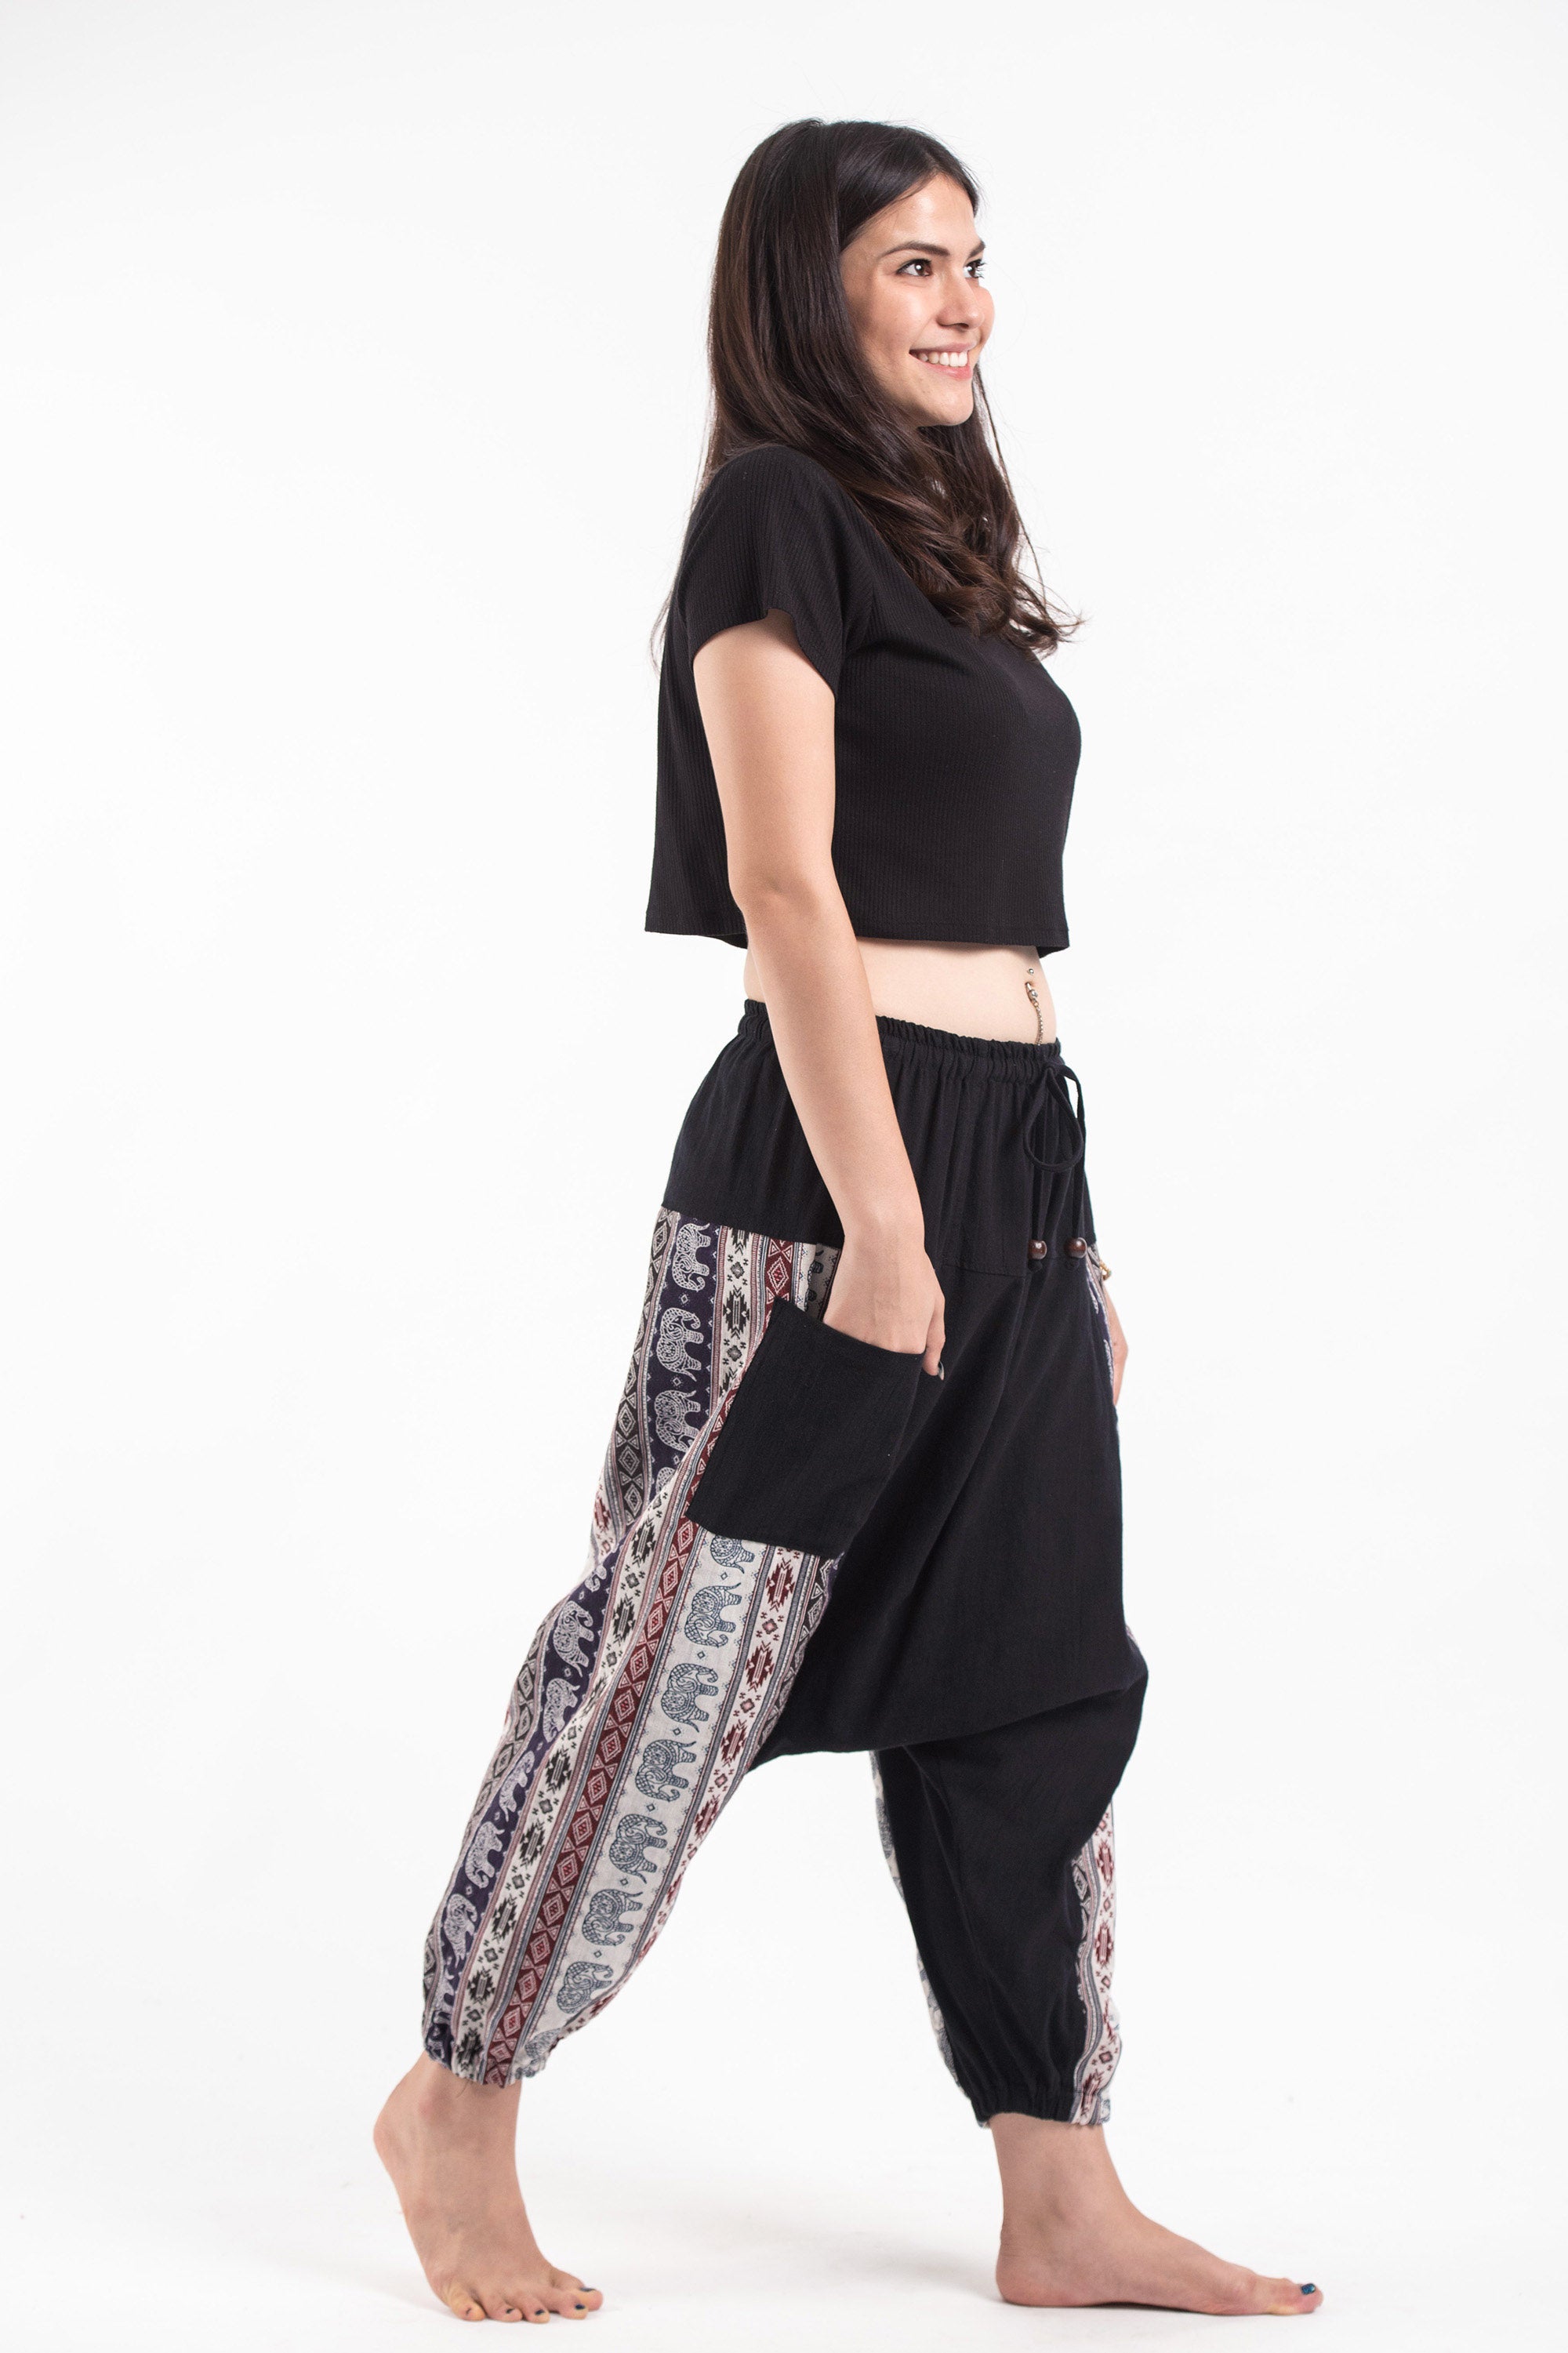 Elephant Aztec Cotton Women's Harem Pants in Black. Free Shipping for ...